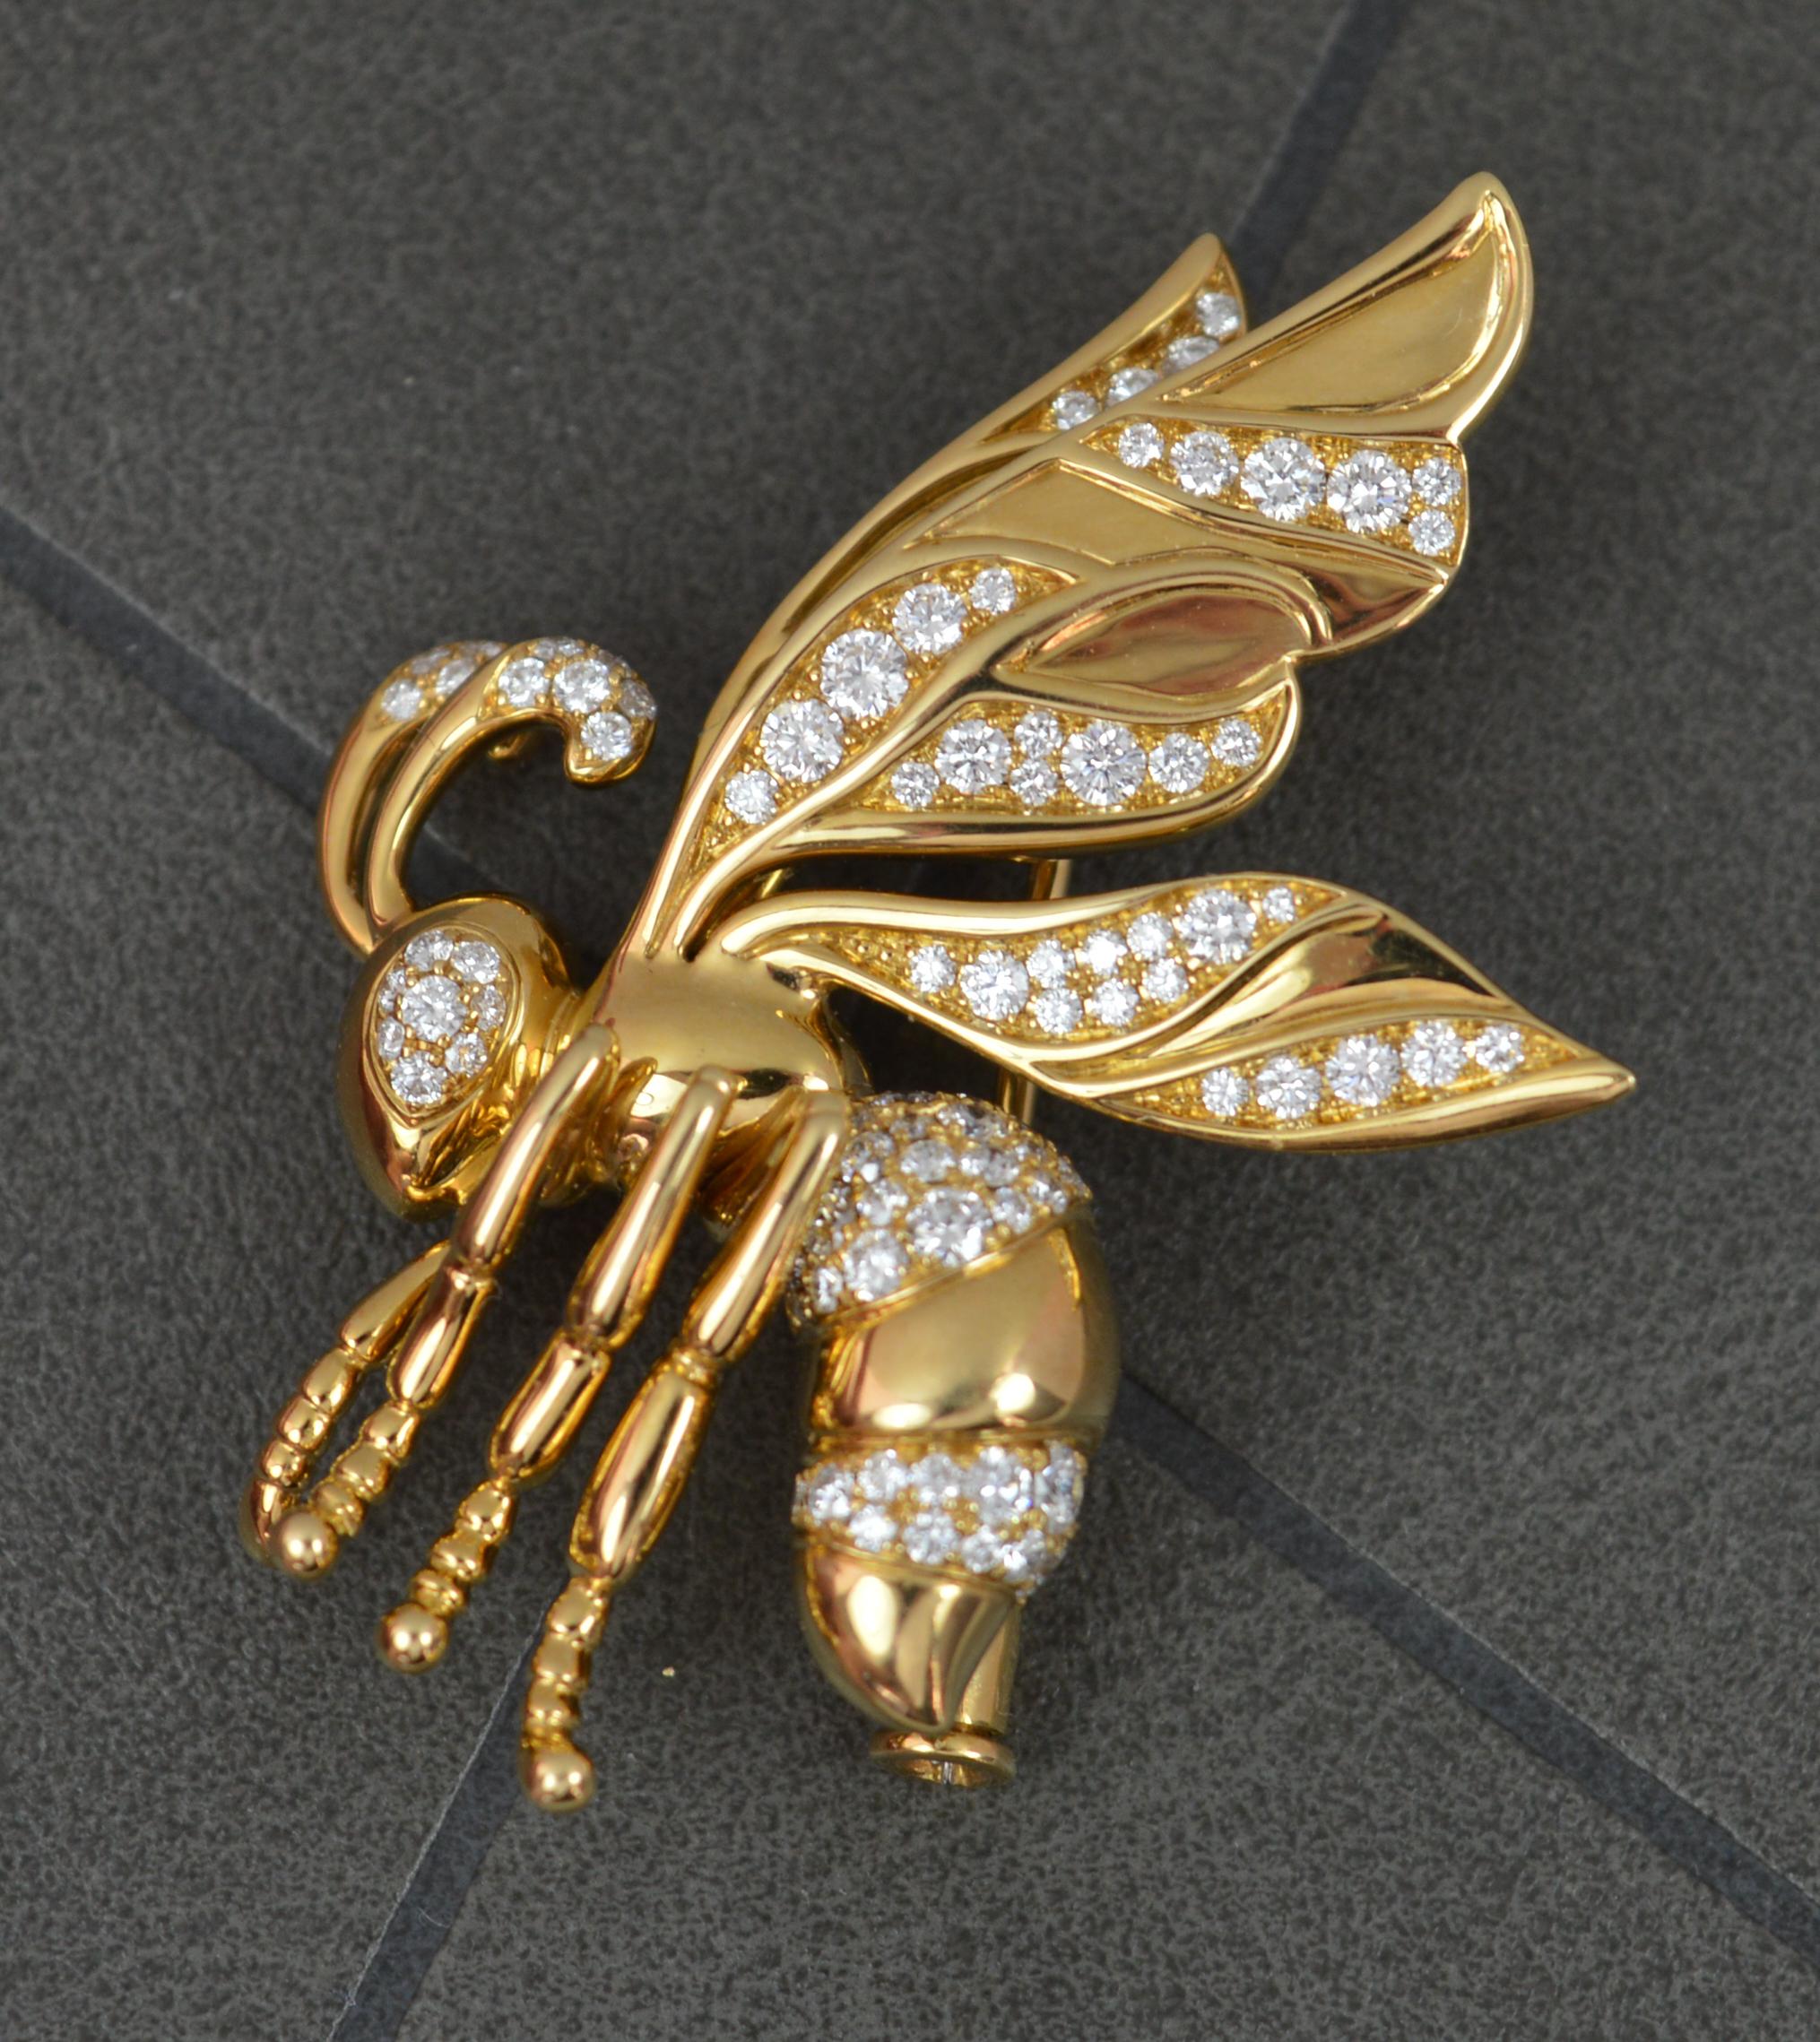 A stunning Kat Florence designer pendant brooch.
Solid and substantial piece, solid 18 carat yellow gold.
Pave set with round brilliant cut diamonds, IF-VVS1, E-F. 0.87 carats total.
Shaped as a wasp. 

CONDITION ; Excellent. Working pin and clasp.